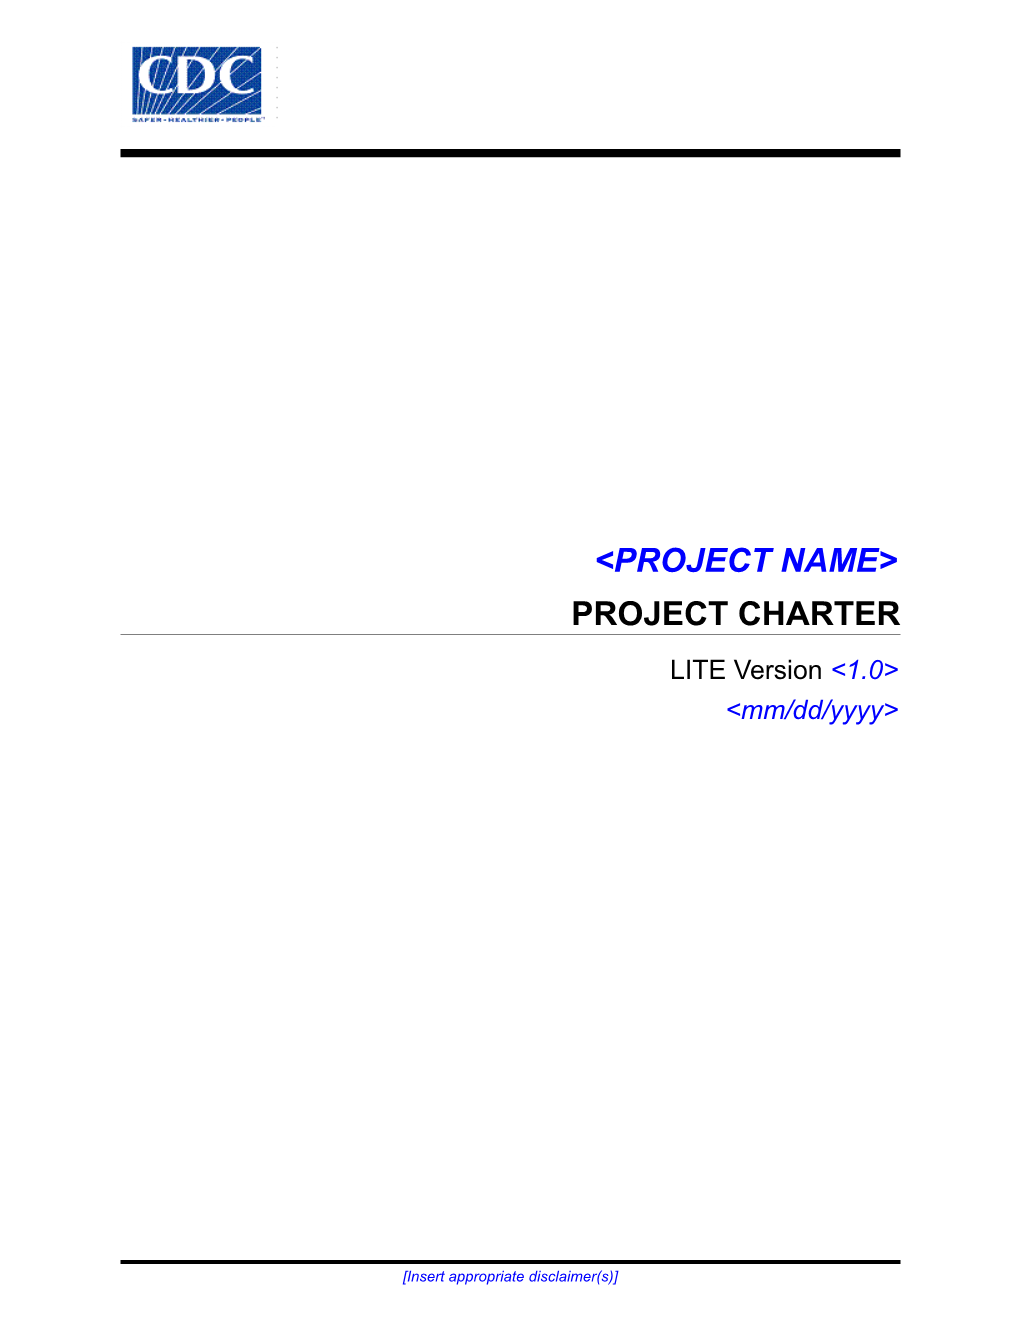 Project Charter - Lite Template